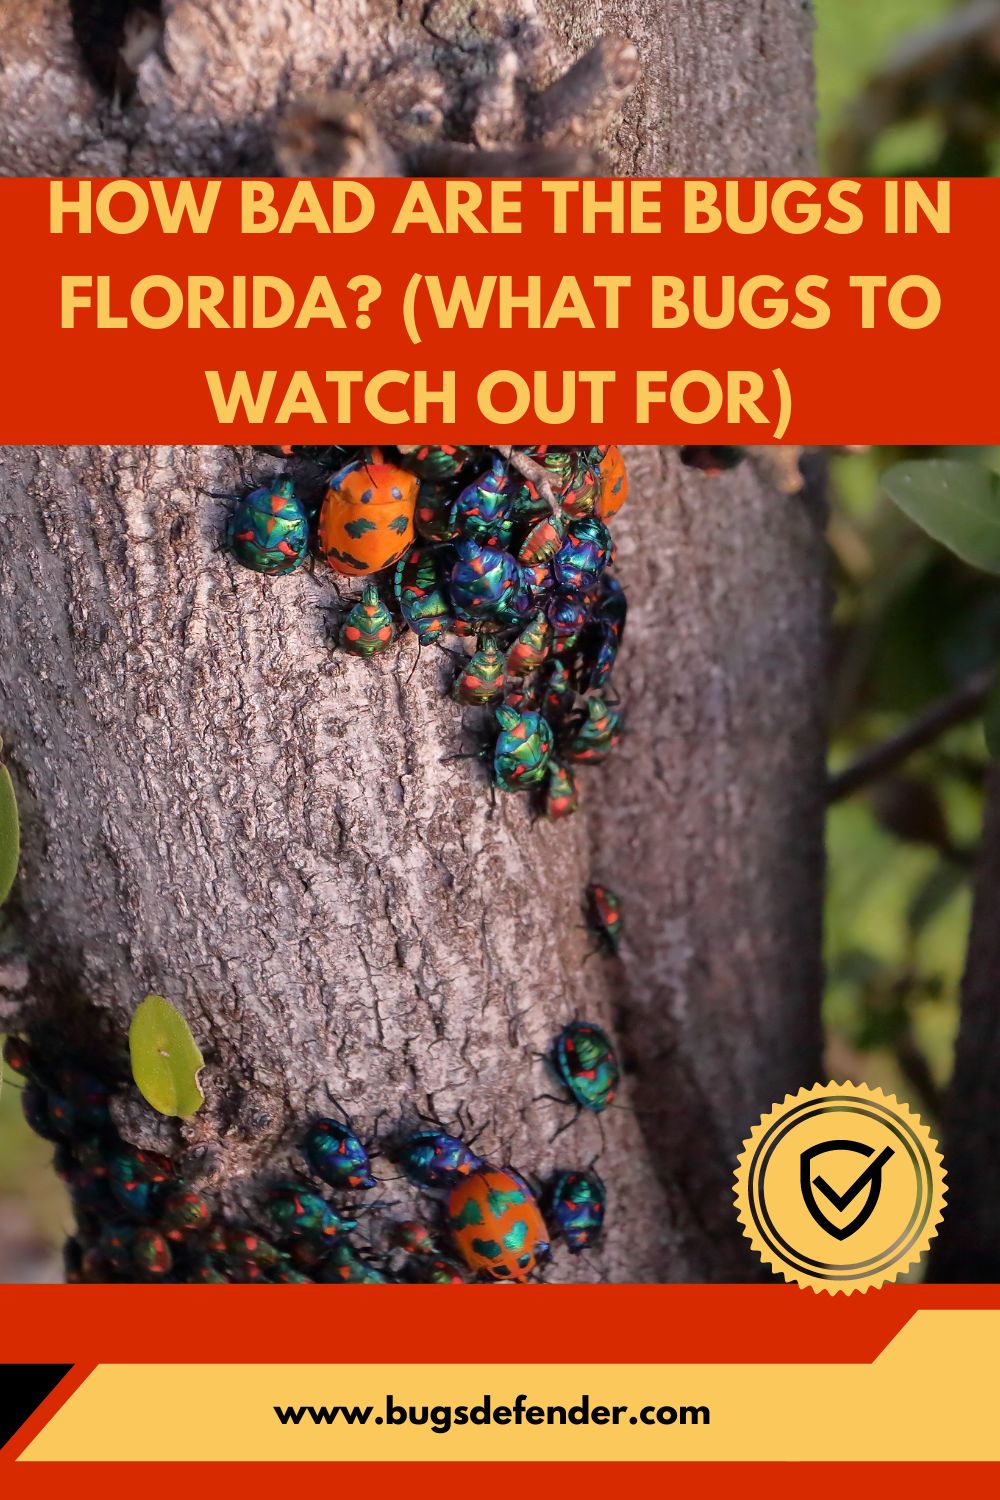 How Bad Are The Bugs In Florida? (What Bugs To Watch Out For) pin 1